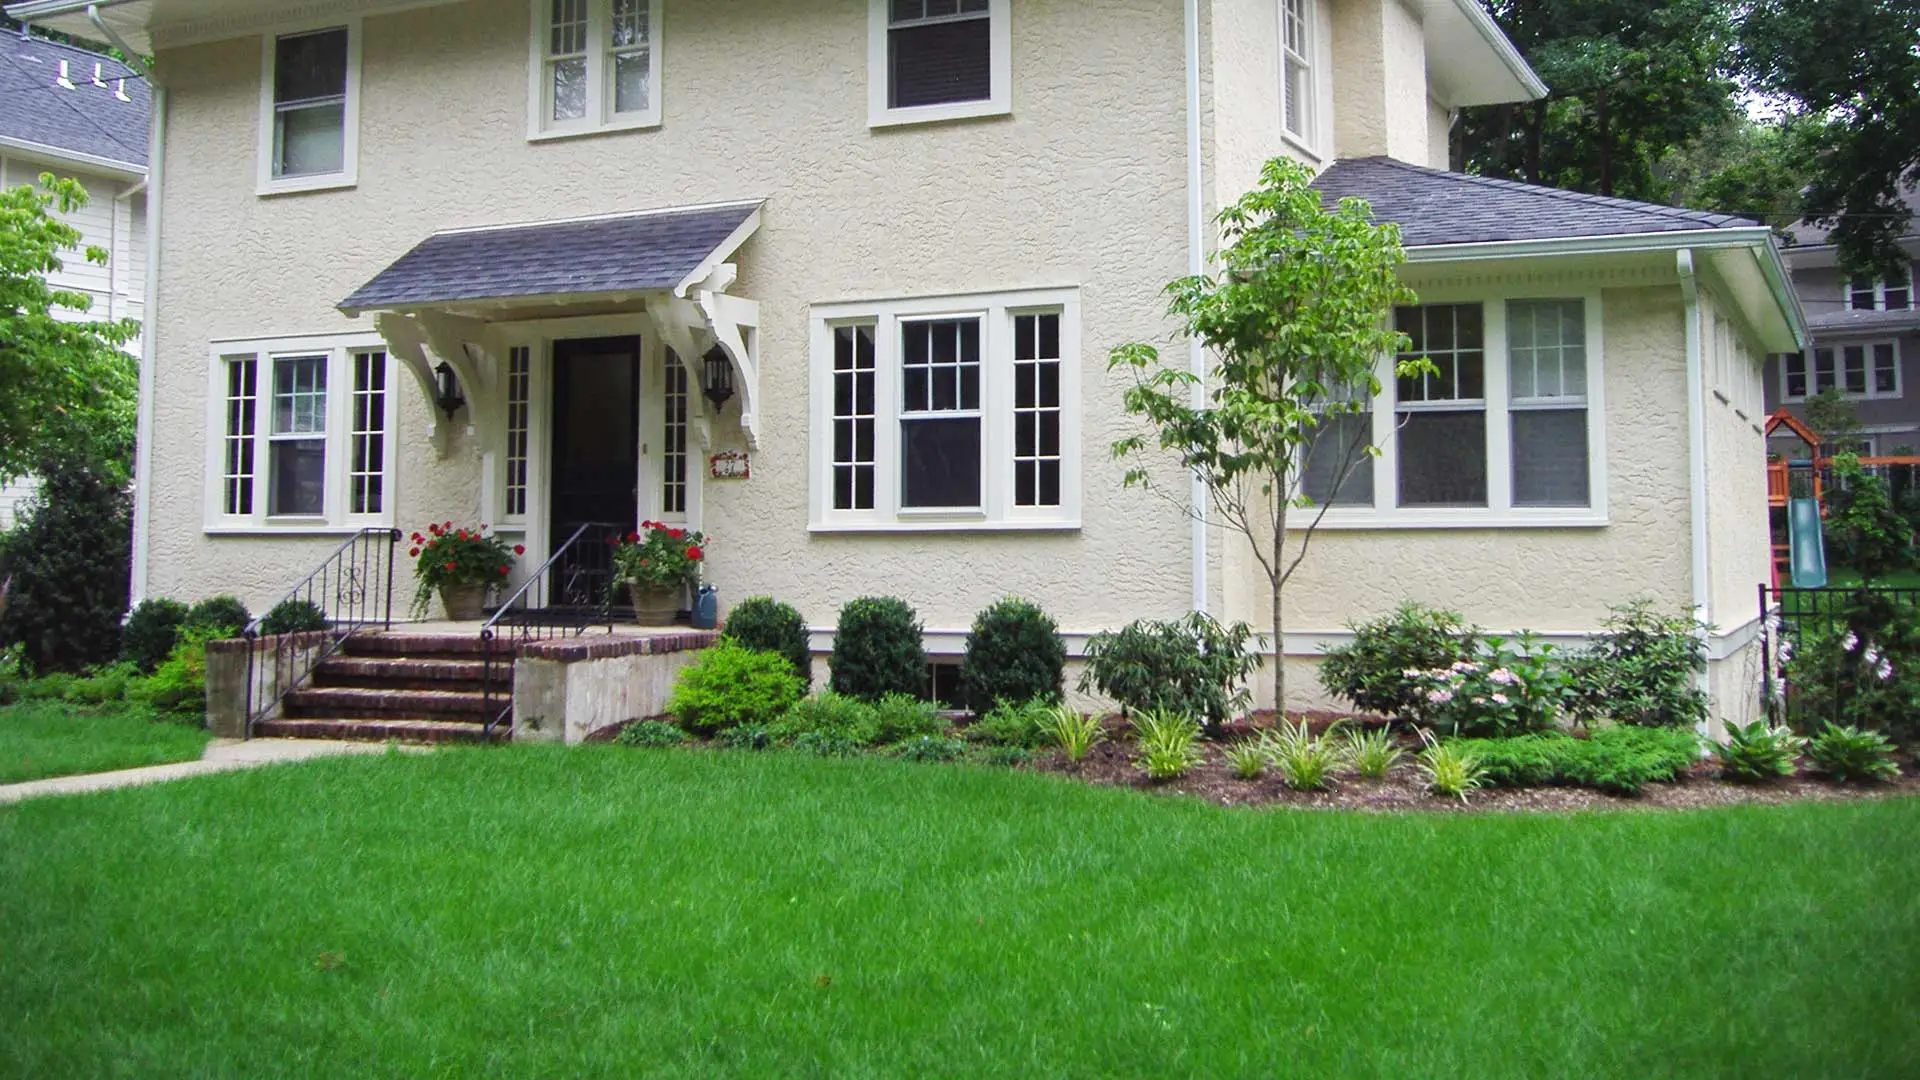 Our customers prefer our lawn services package because it handles multiple aspects of lawn maintenance.